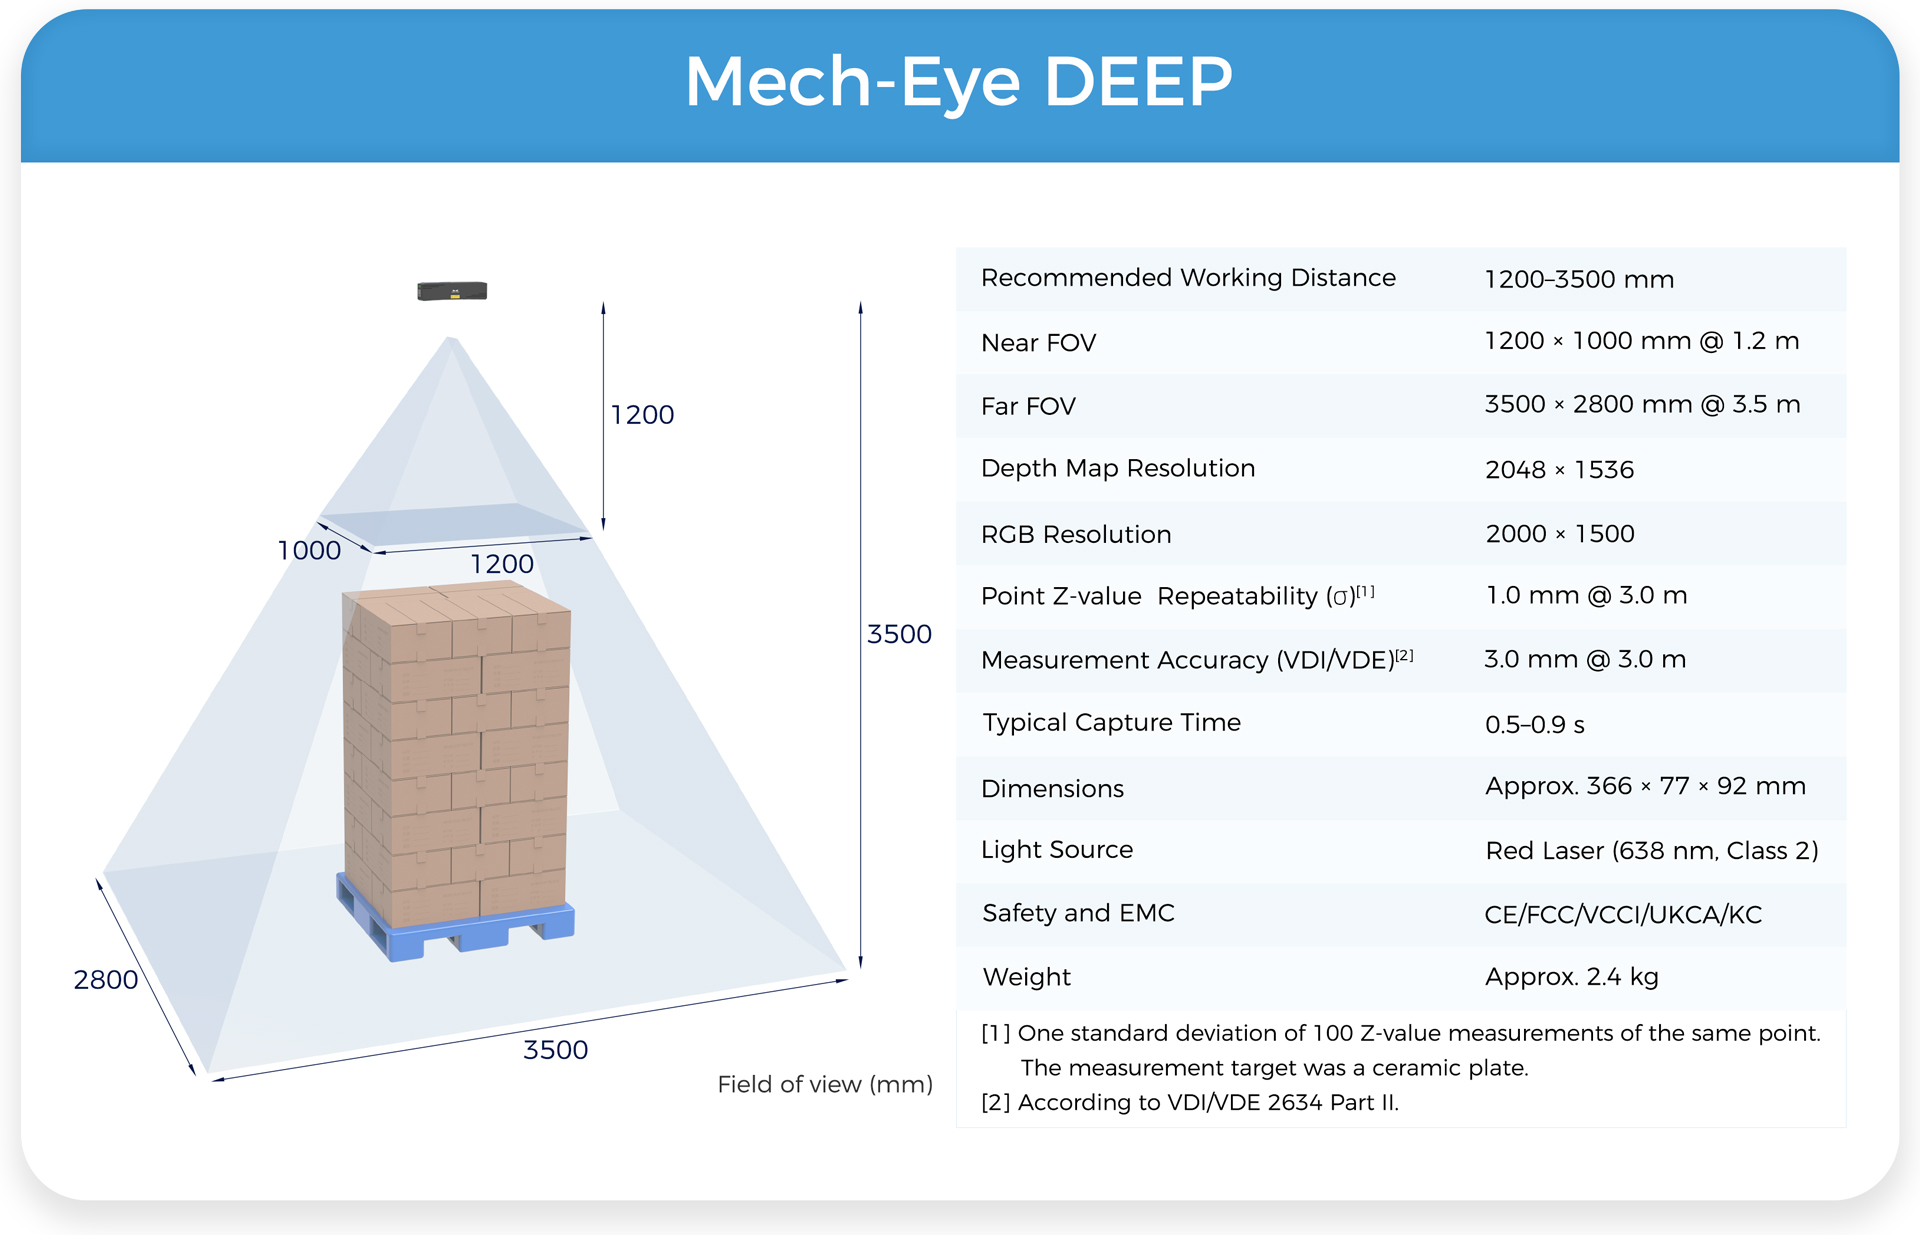 Introducing Brand New 4th Generation Mech-Eye DEEP for Palletizing and Depalletizing Applications in Logistics  